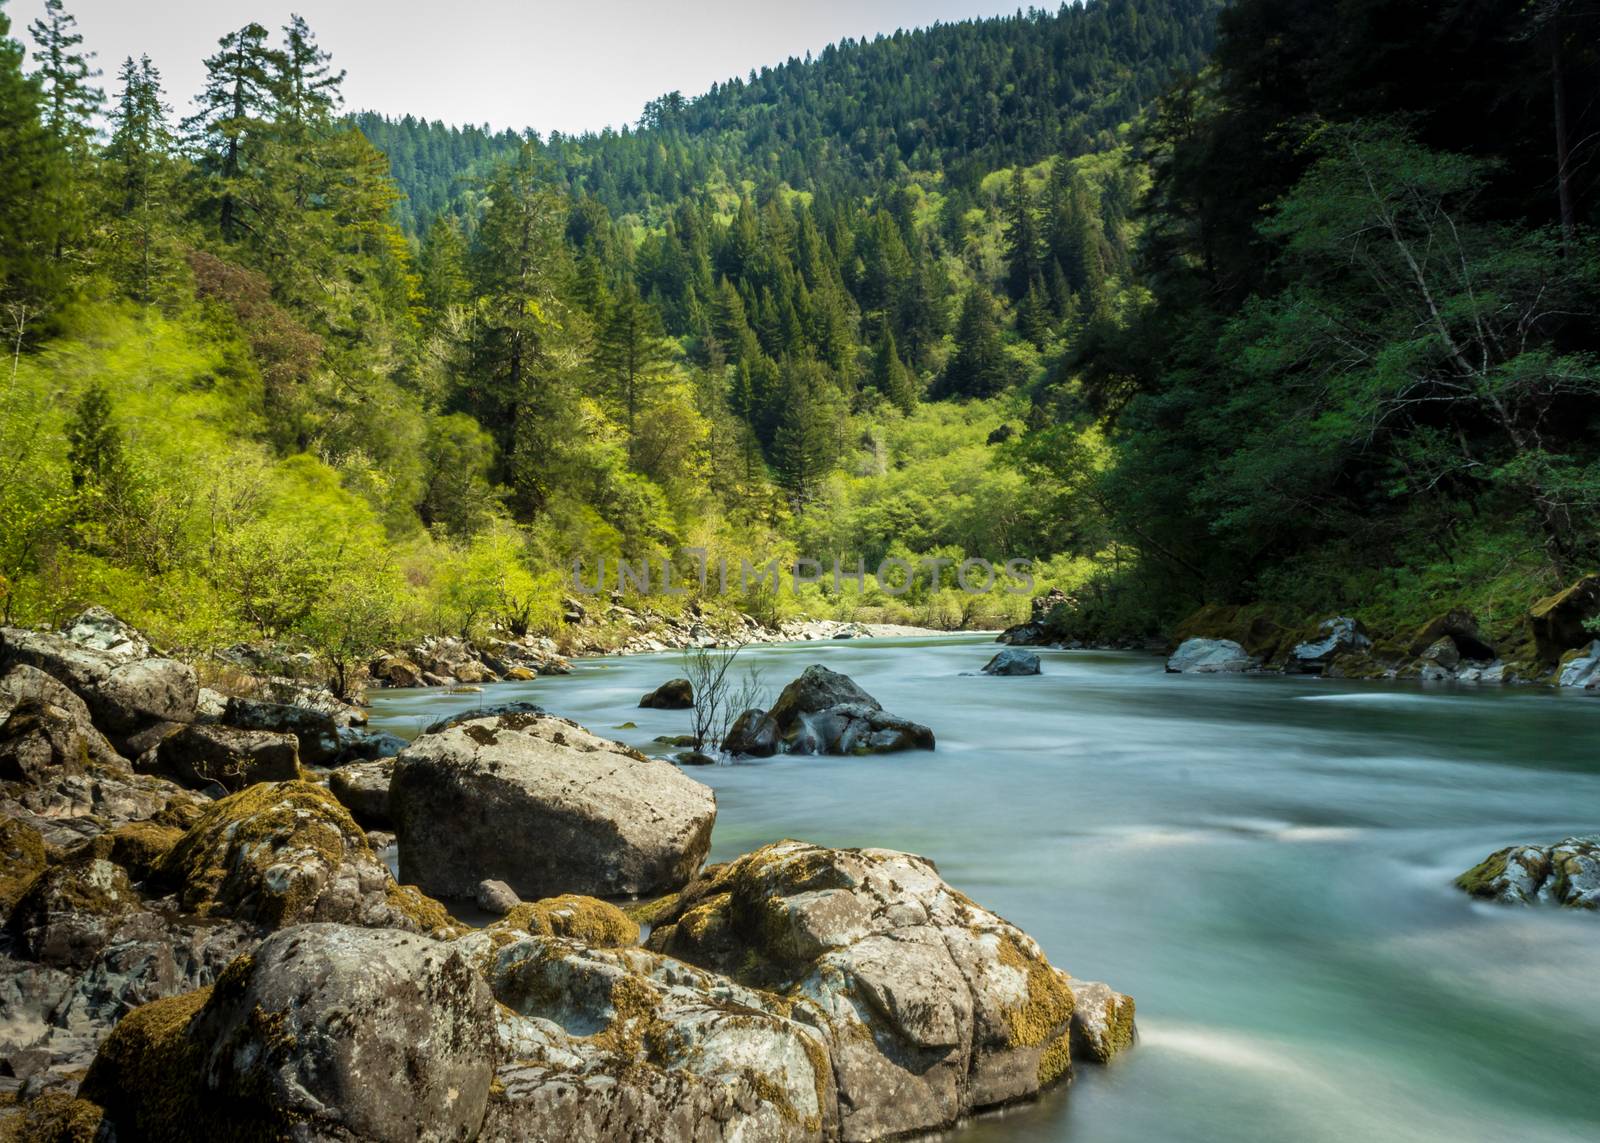 The Smith River in Northern California, USA.